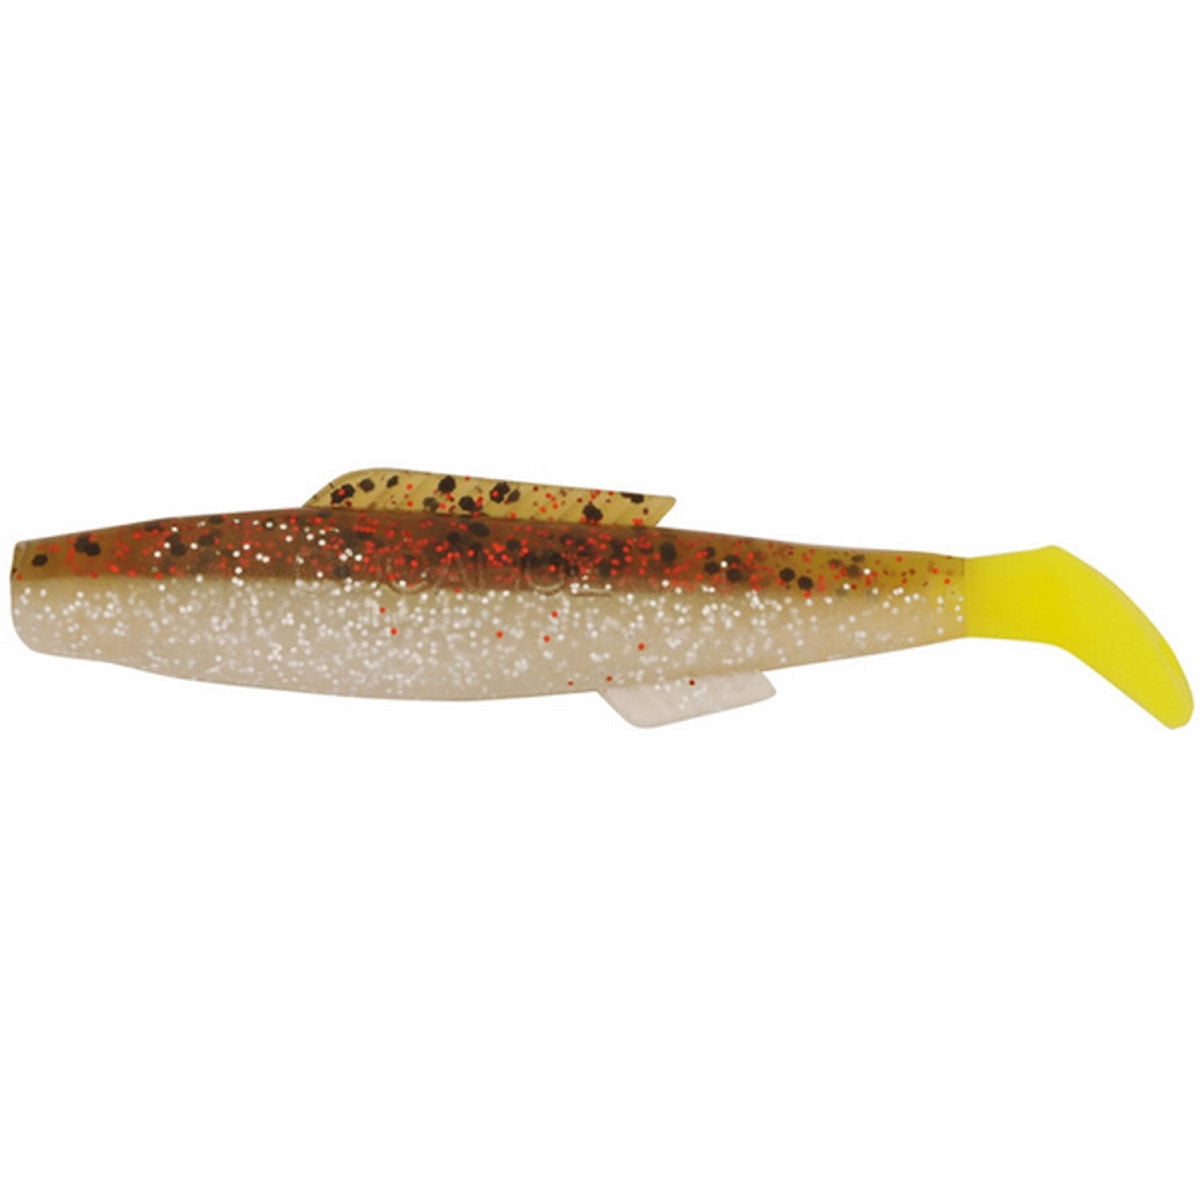 H&H Cocahoe Minnow Softbait, Cock Of The Walk, 10 Count